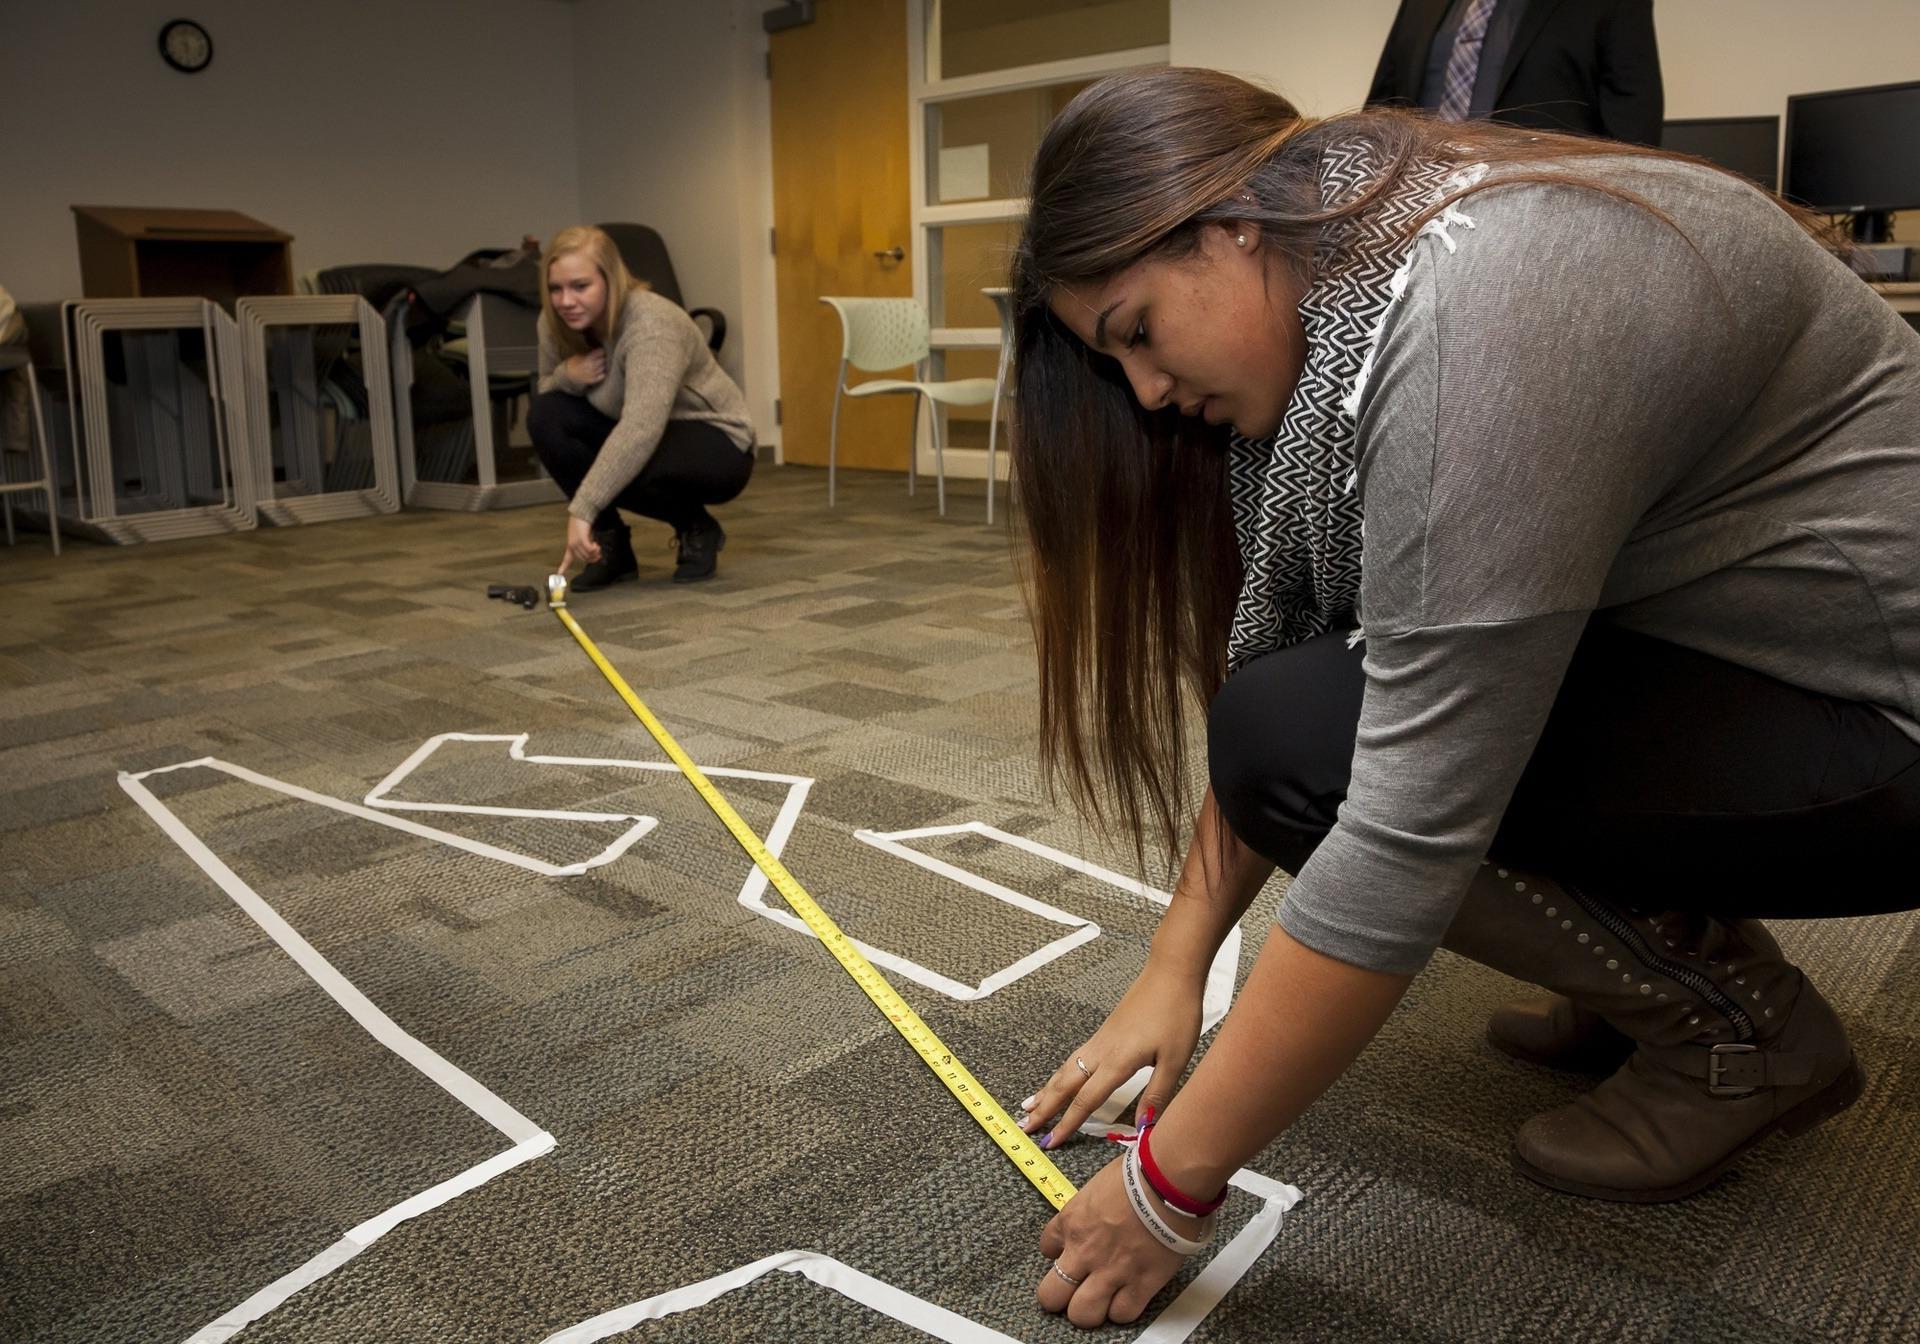 Two female BGSU forensic investigation students measure the distance from a body to a firearm in an on-campus crime scene lab.